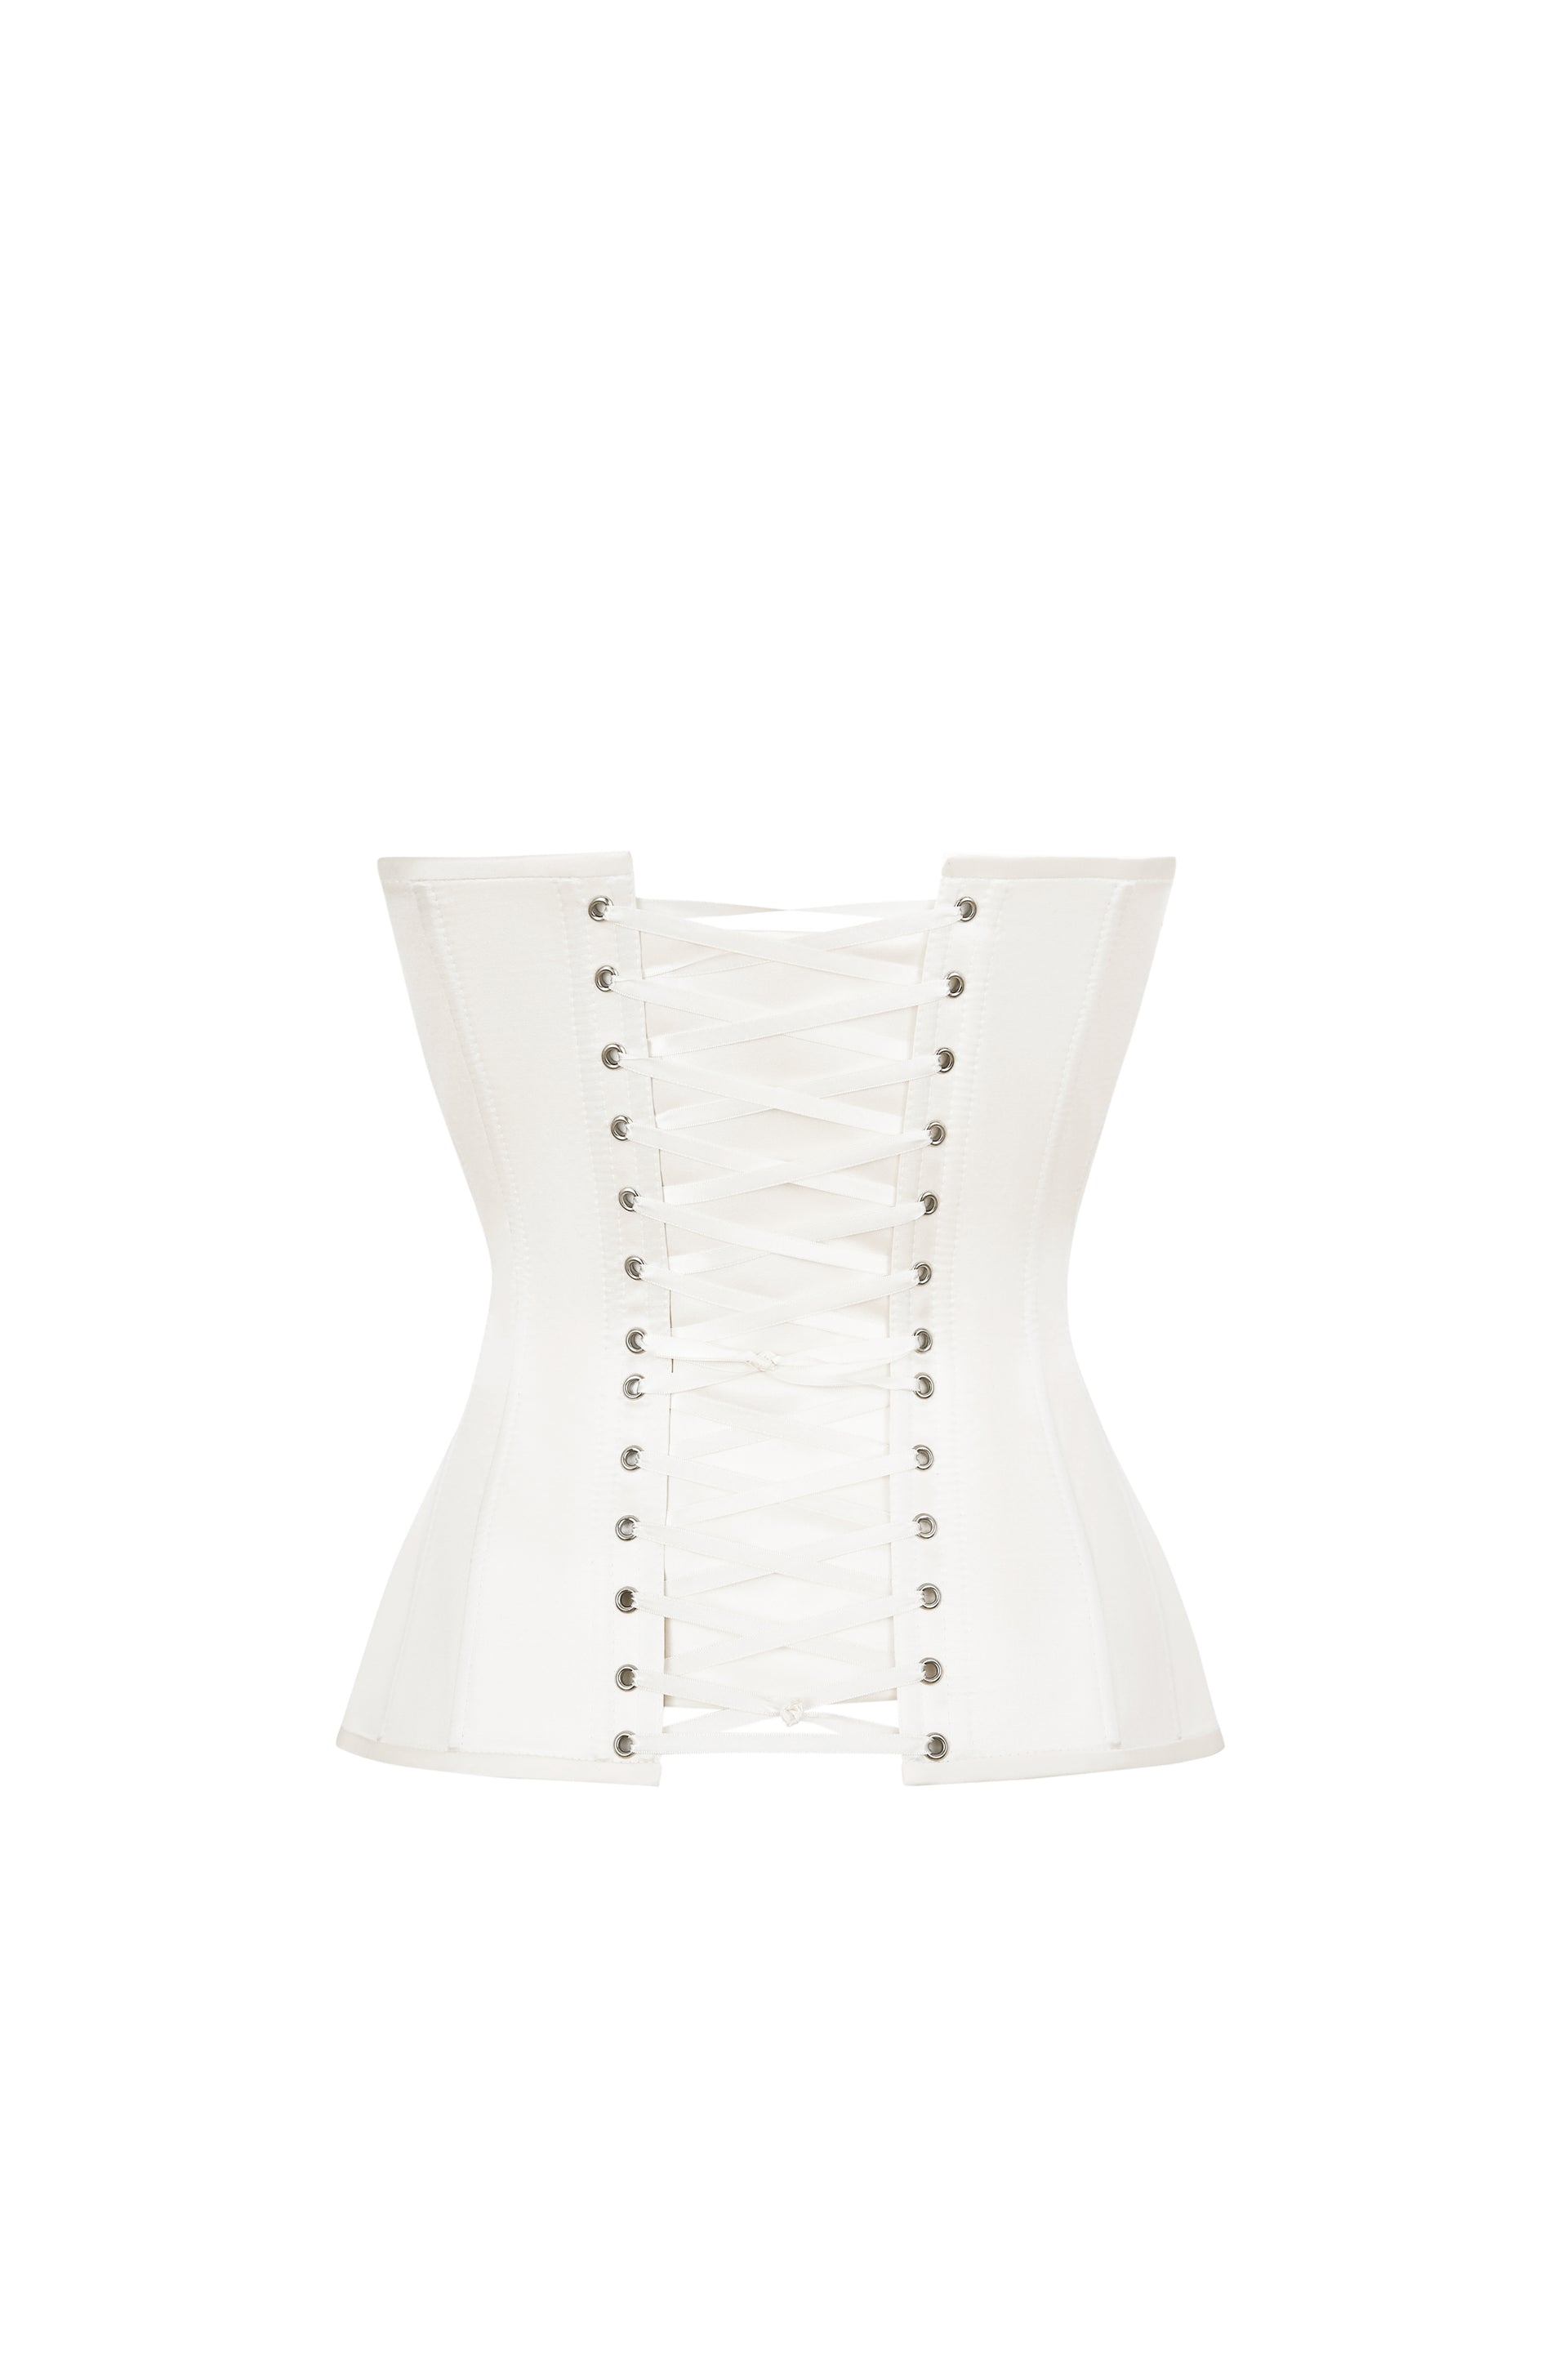 Off white satin corset with transparent front